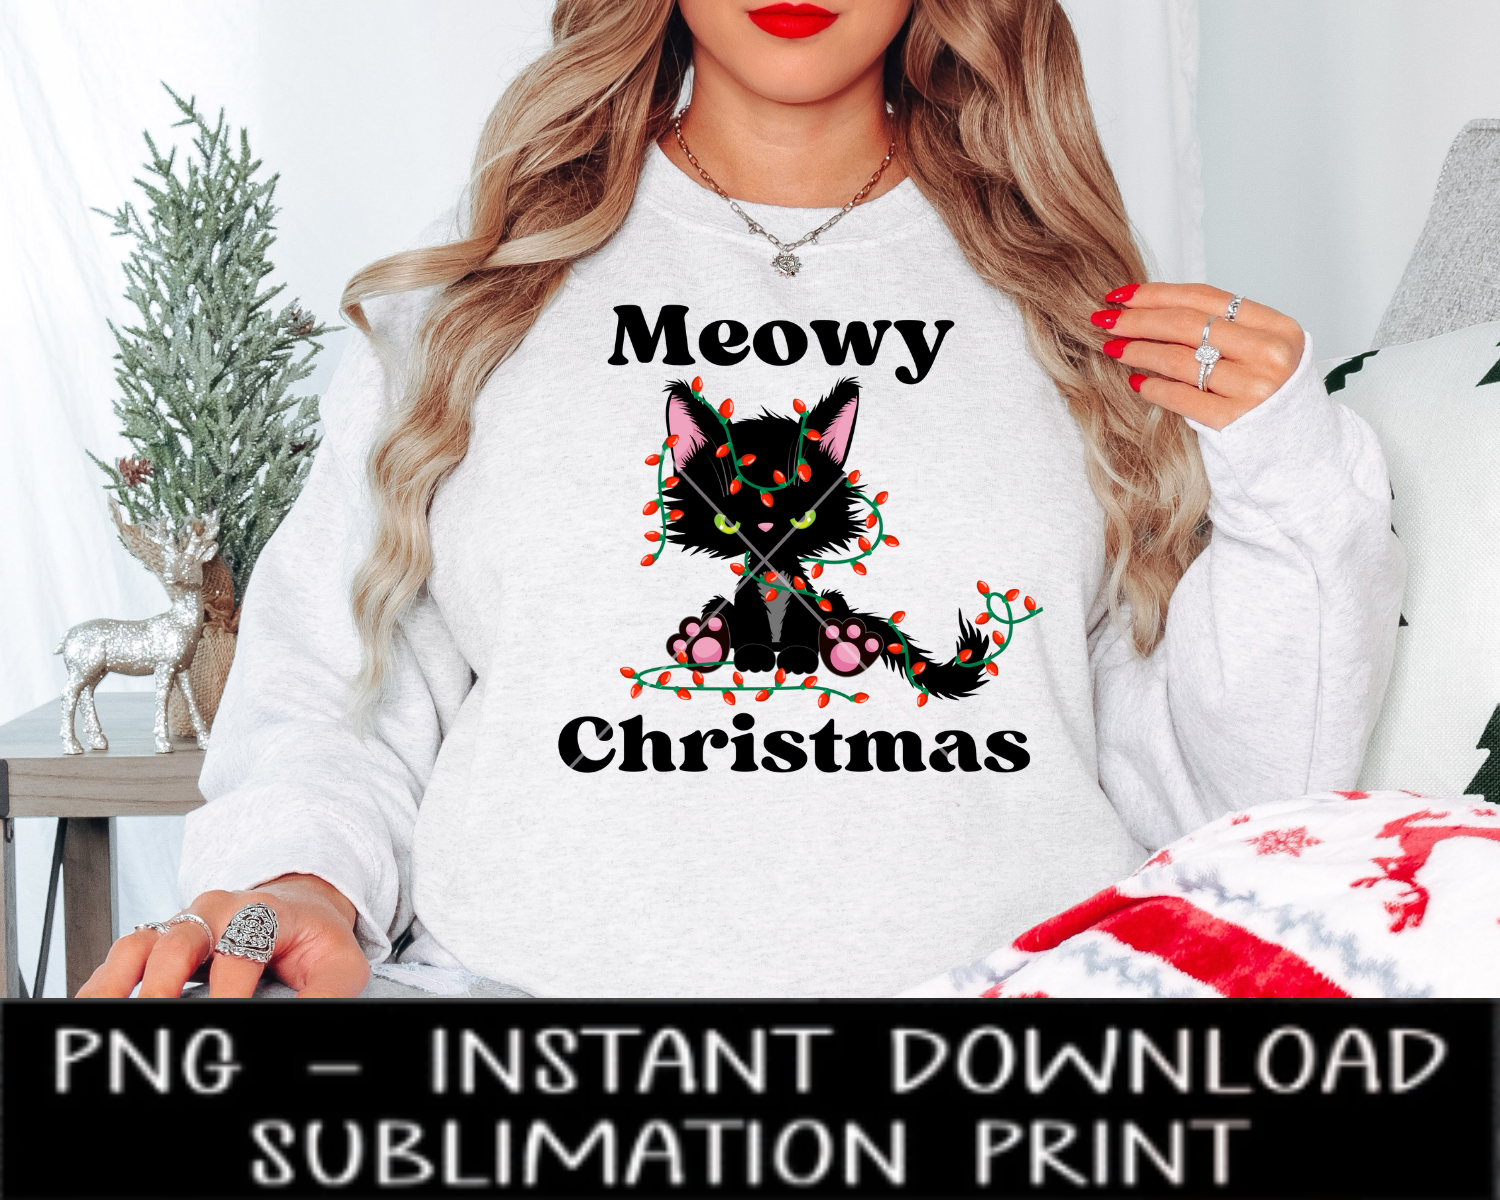 Meowy Christmas Cat PNG, Merry Christmas UV DtF File, Christmas Iced Coffee Glass PNG Digital Design, Sublimation PnG, Instant Download Water Slide PnG